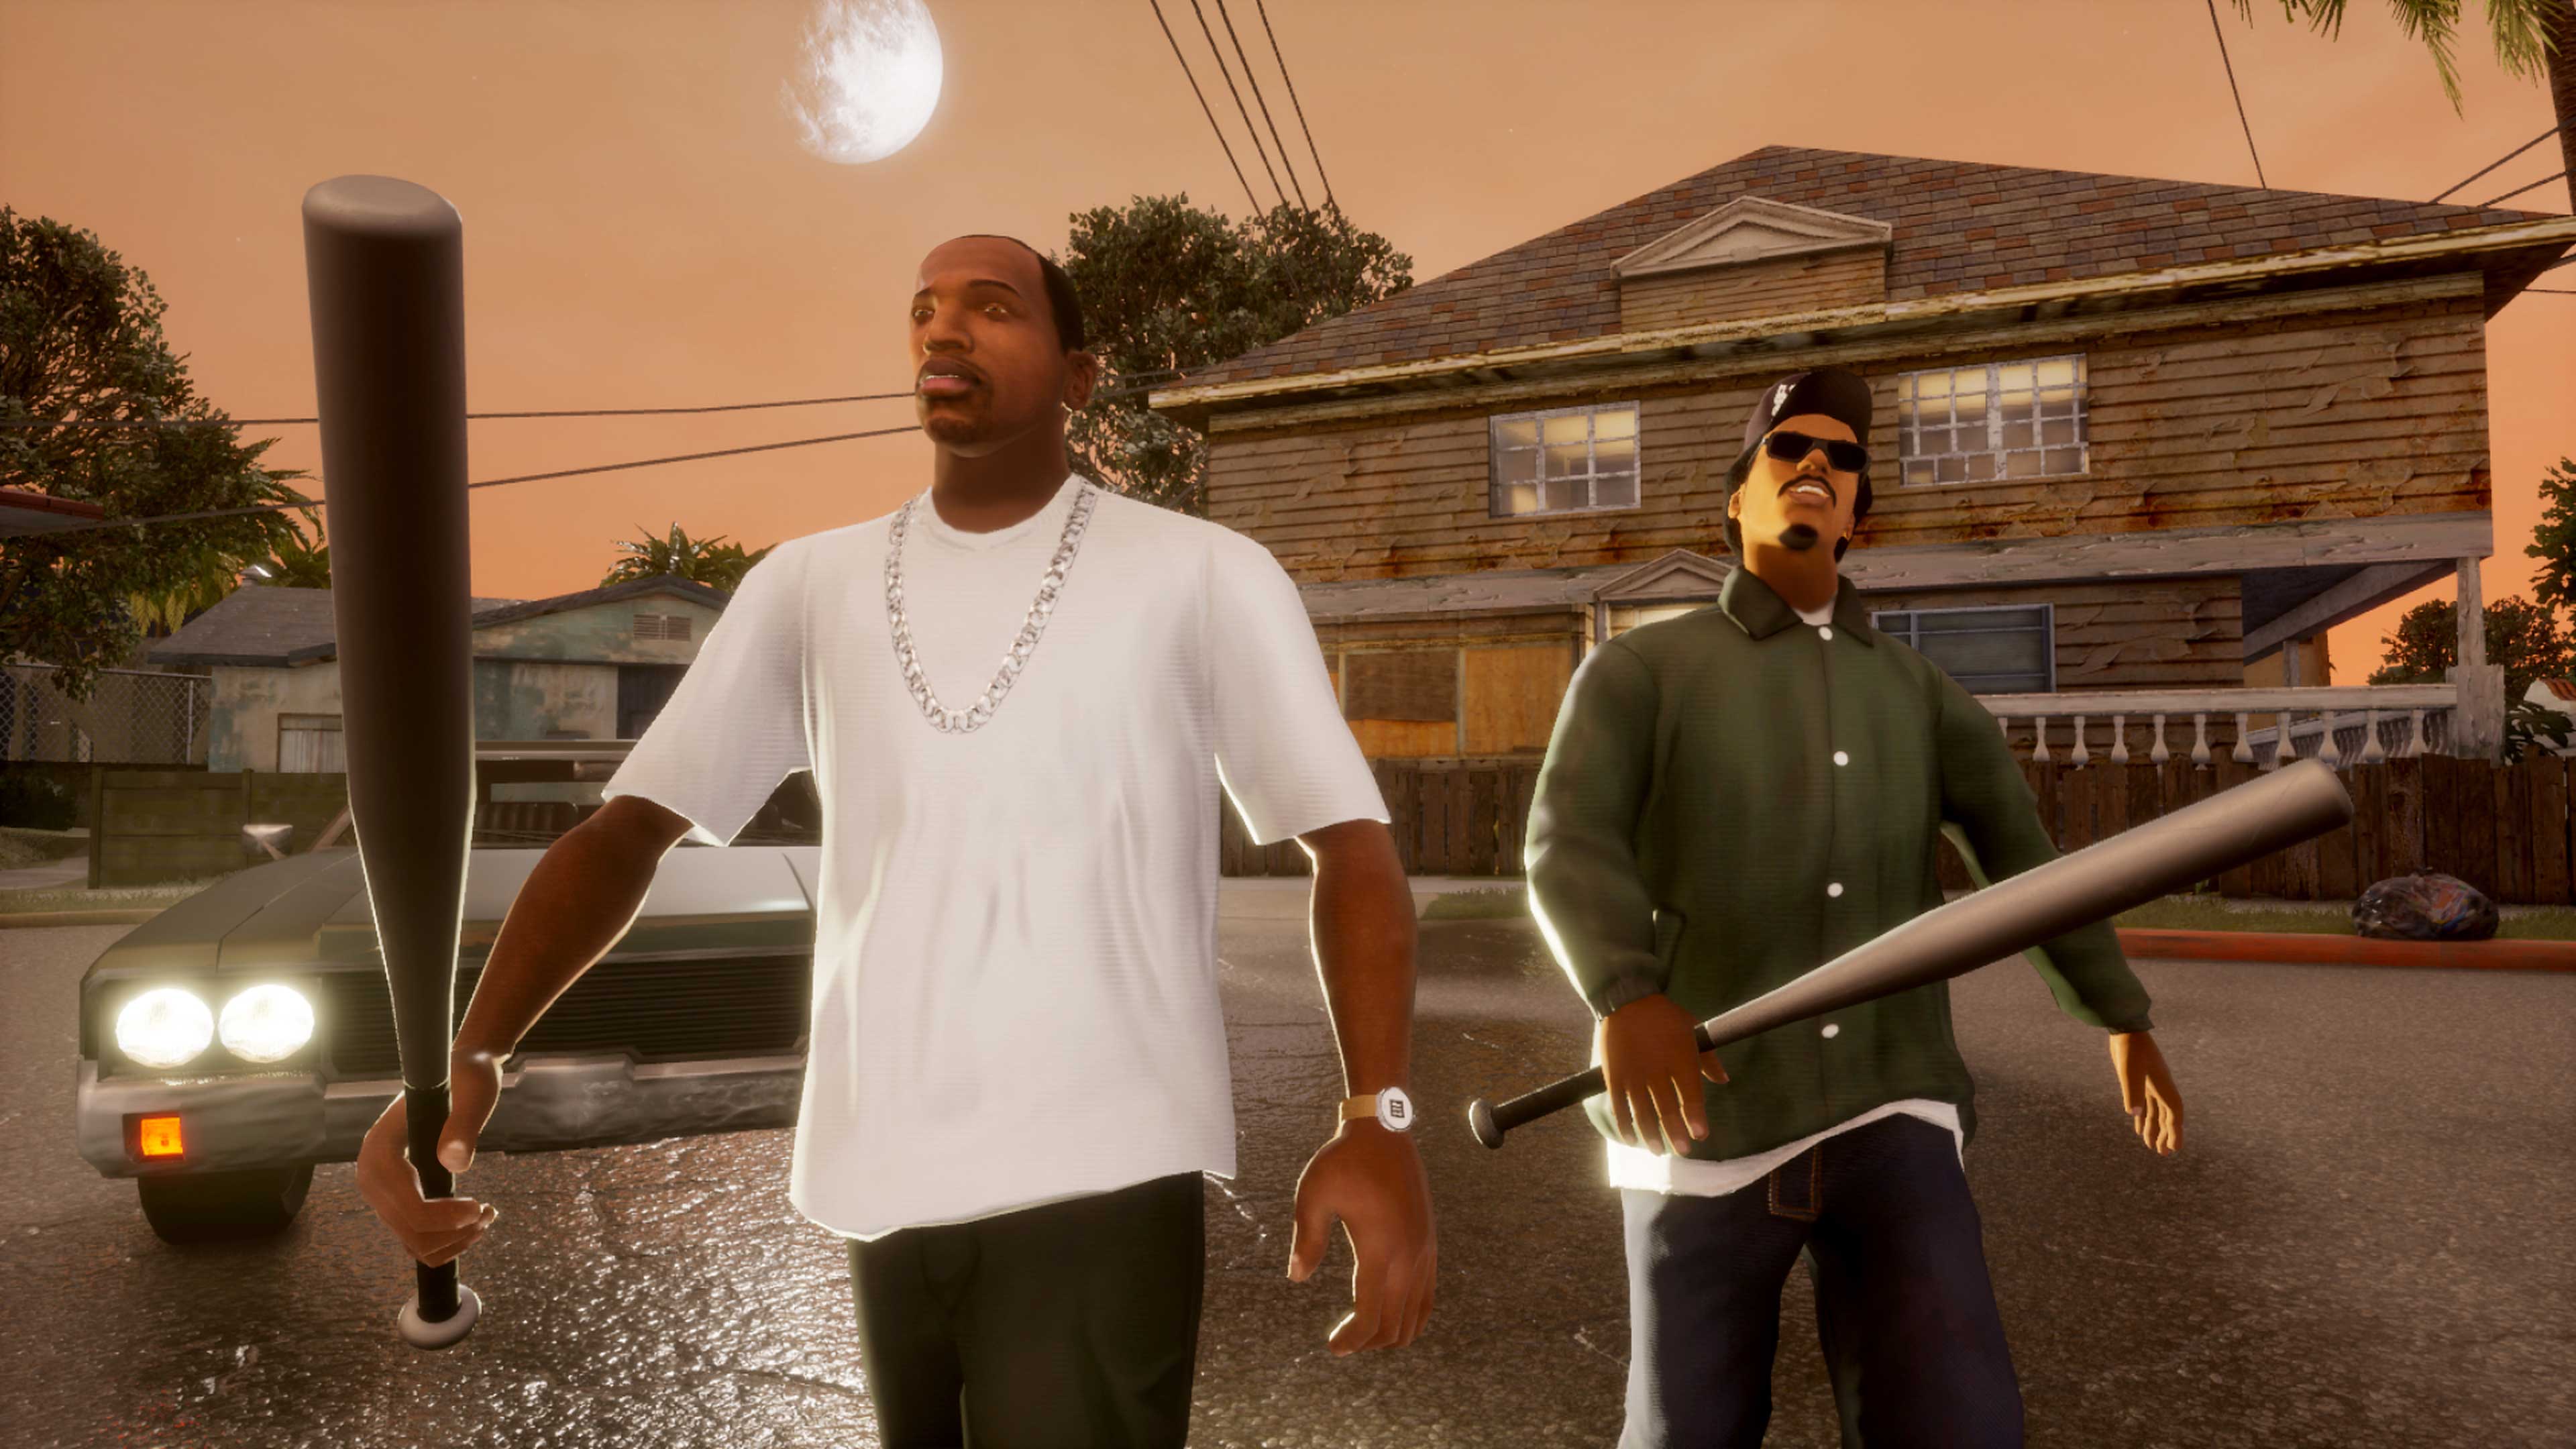 CJ and Rider walking in Grand Theft Auto: San Andreas – The Definitive Edition.